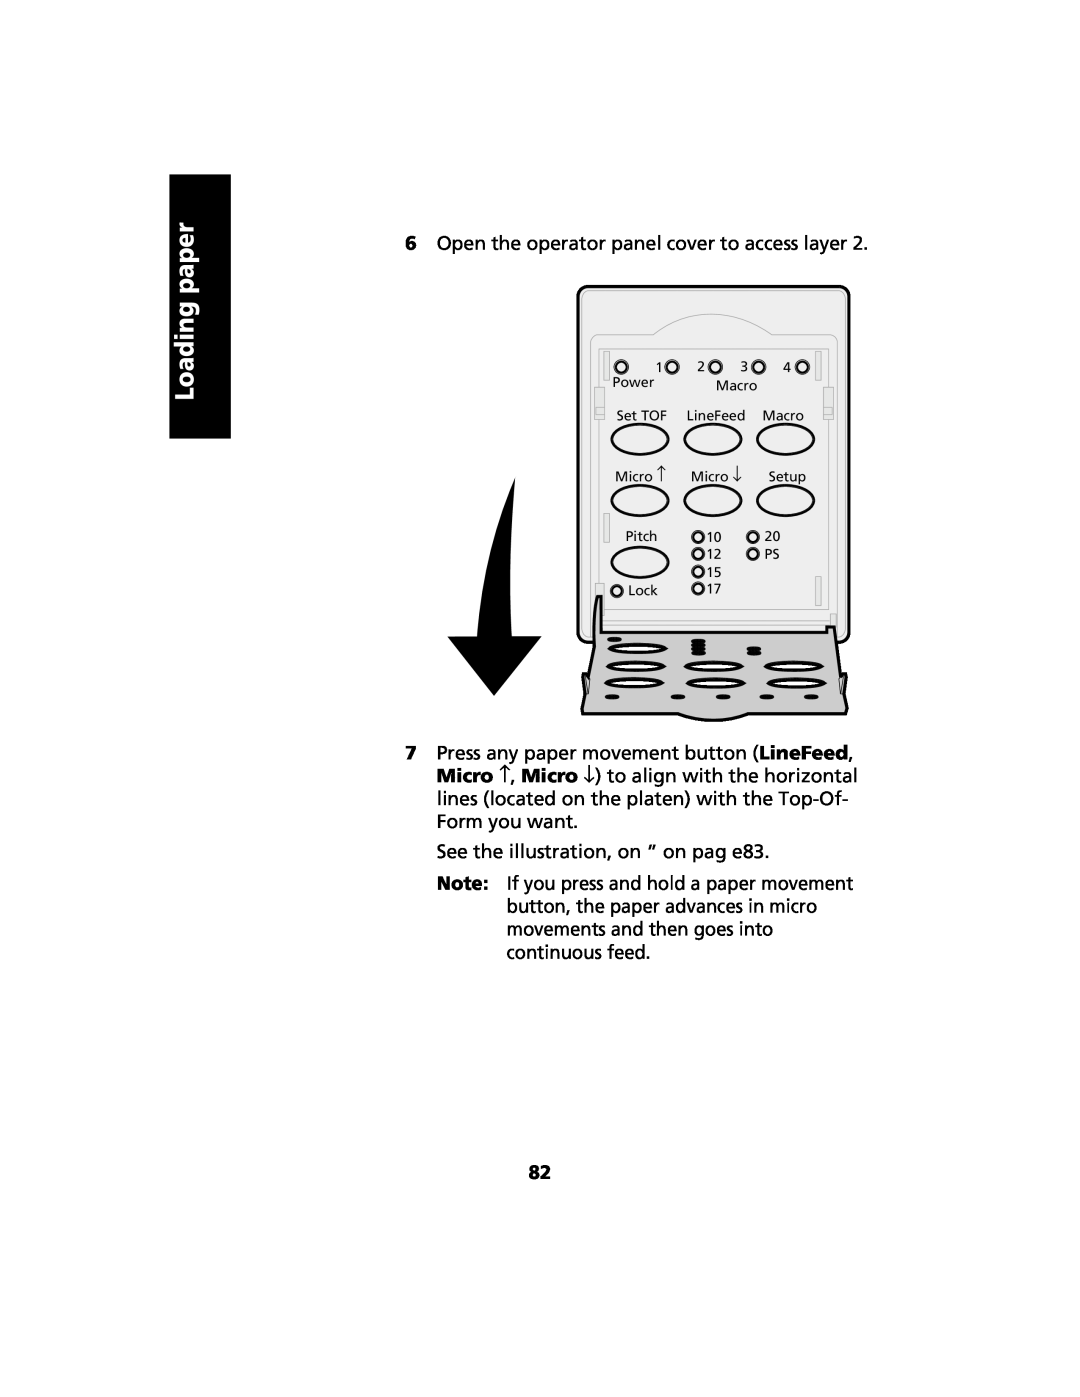 Lexmark 2480 manual Loading paper, Open the operator panel cover to access layer 